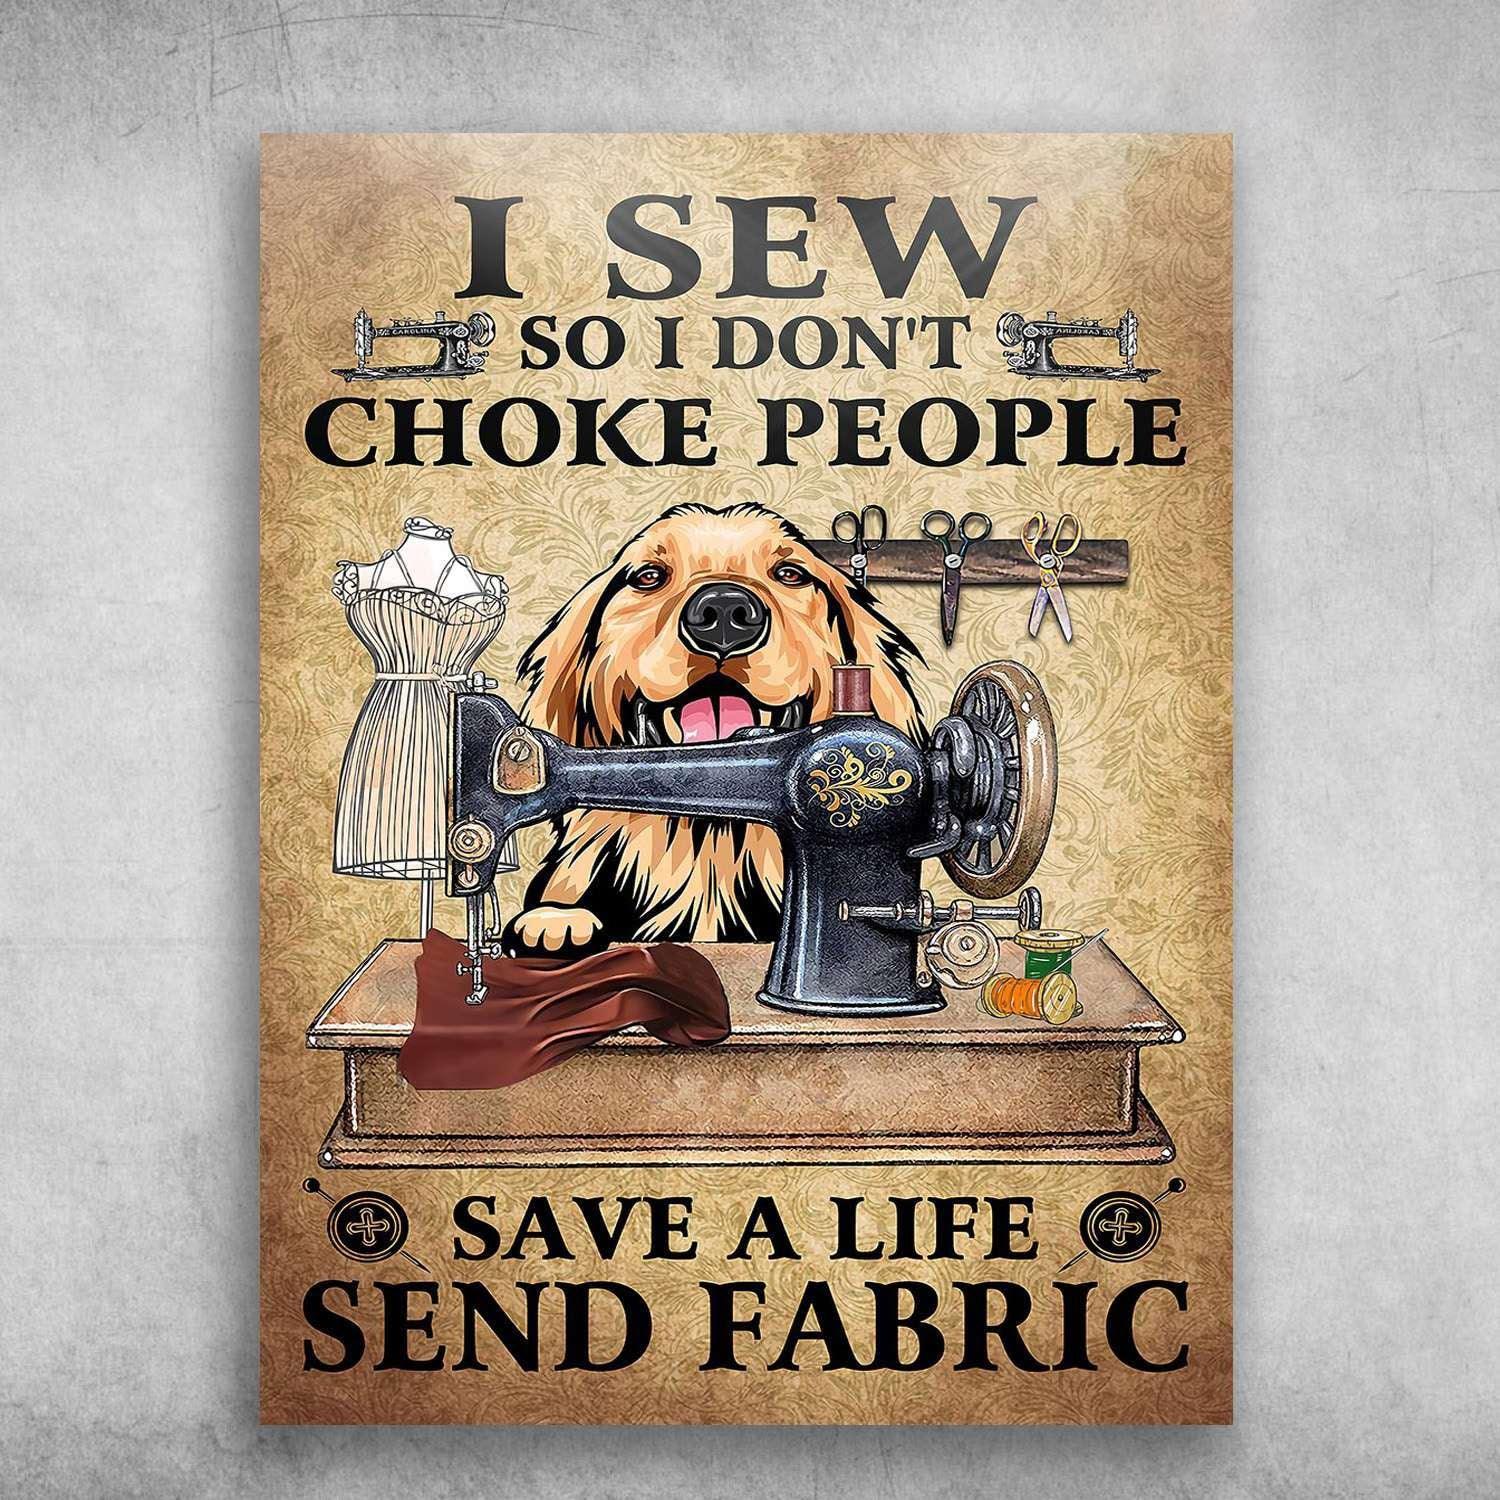 Golden Retriever Portrait Canvas - Dog, Sewing Machine Canvass - I Sew So I Don’t Choke People Save A Life Send Fabric - Gift For Dog Lovers Portrait Canvas - Amzanimalsgift